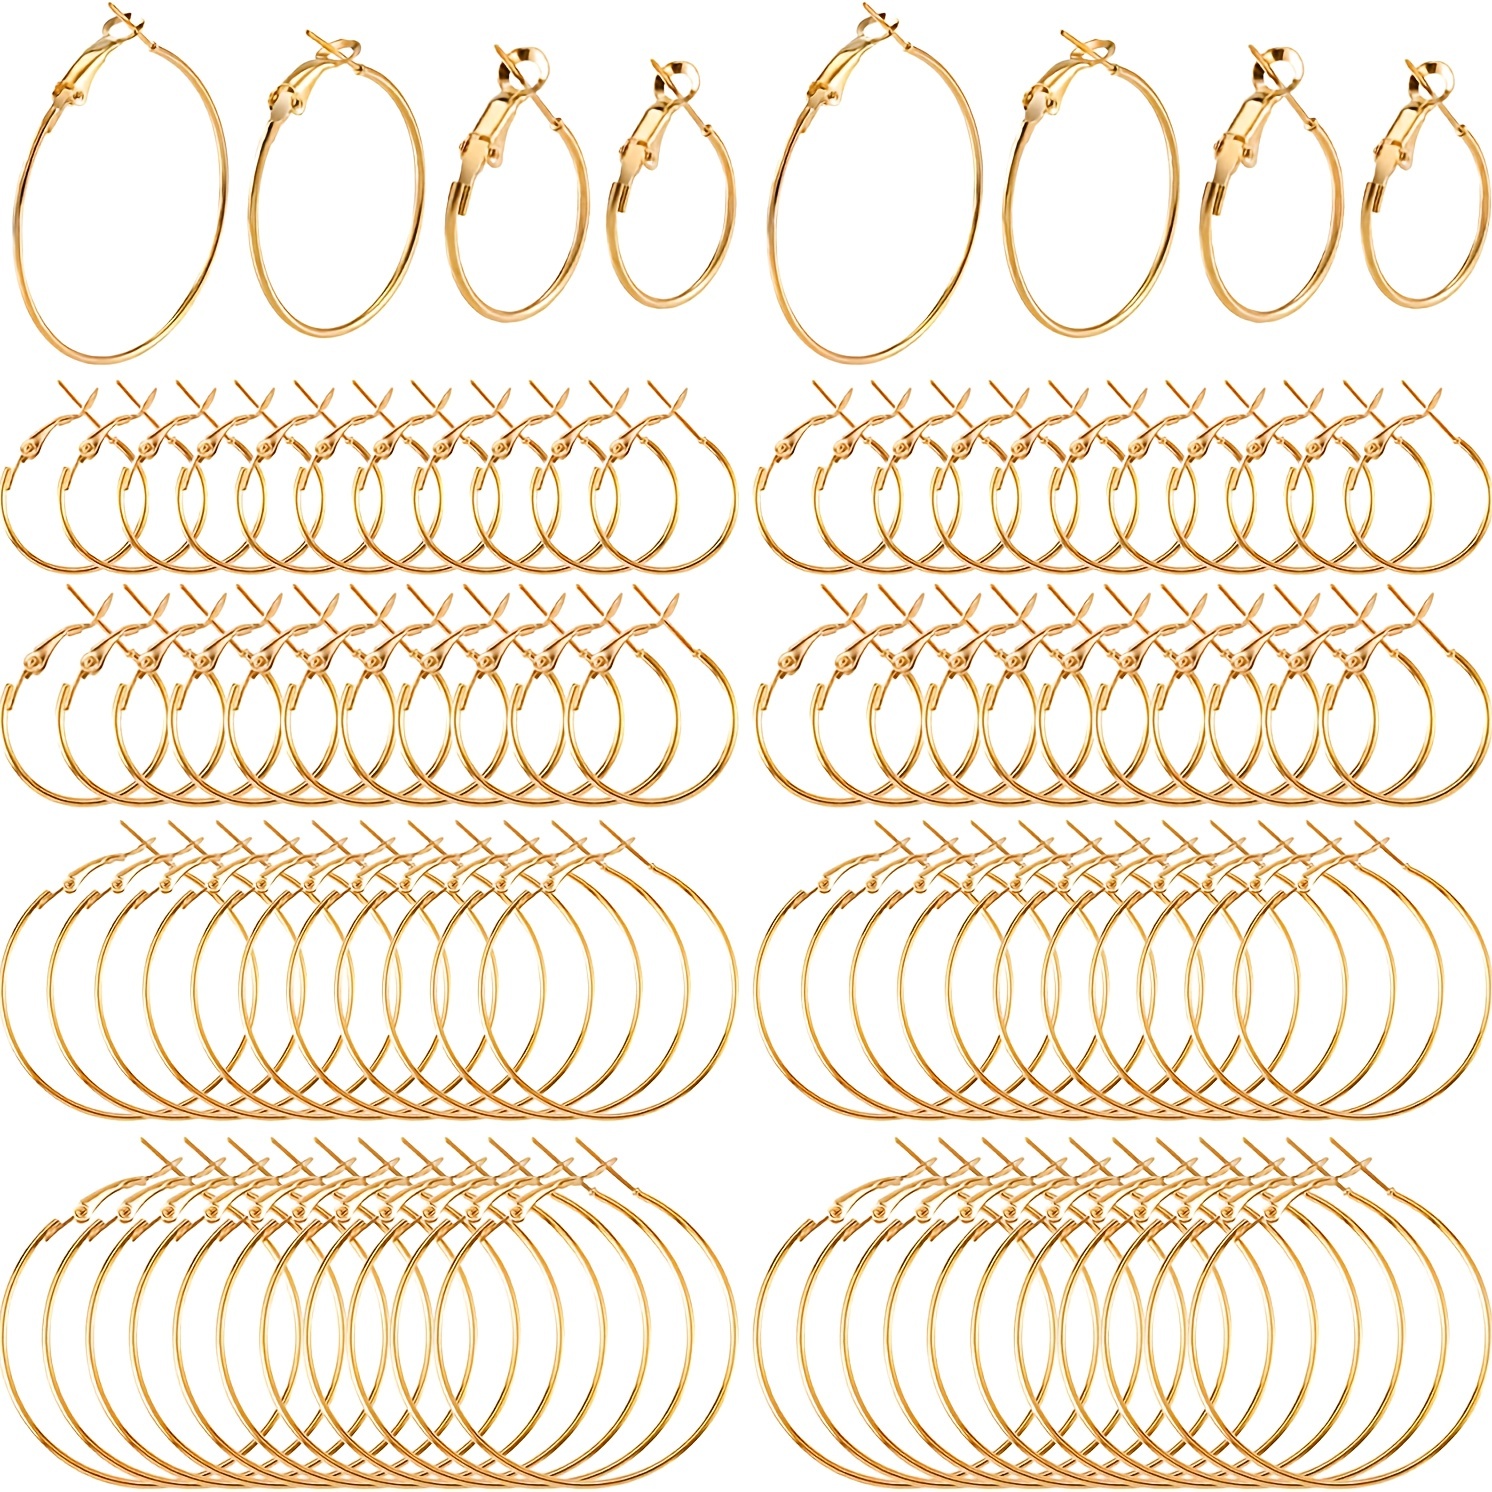 15pcs Bamboo Embroidery Hoops Set, 12 Inch Embroidery Hoop